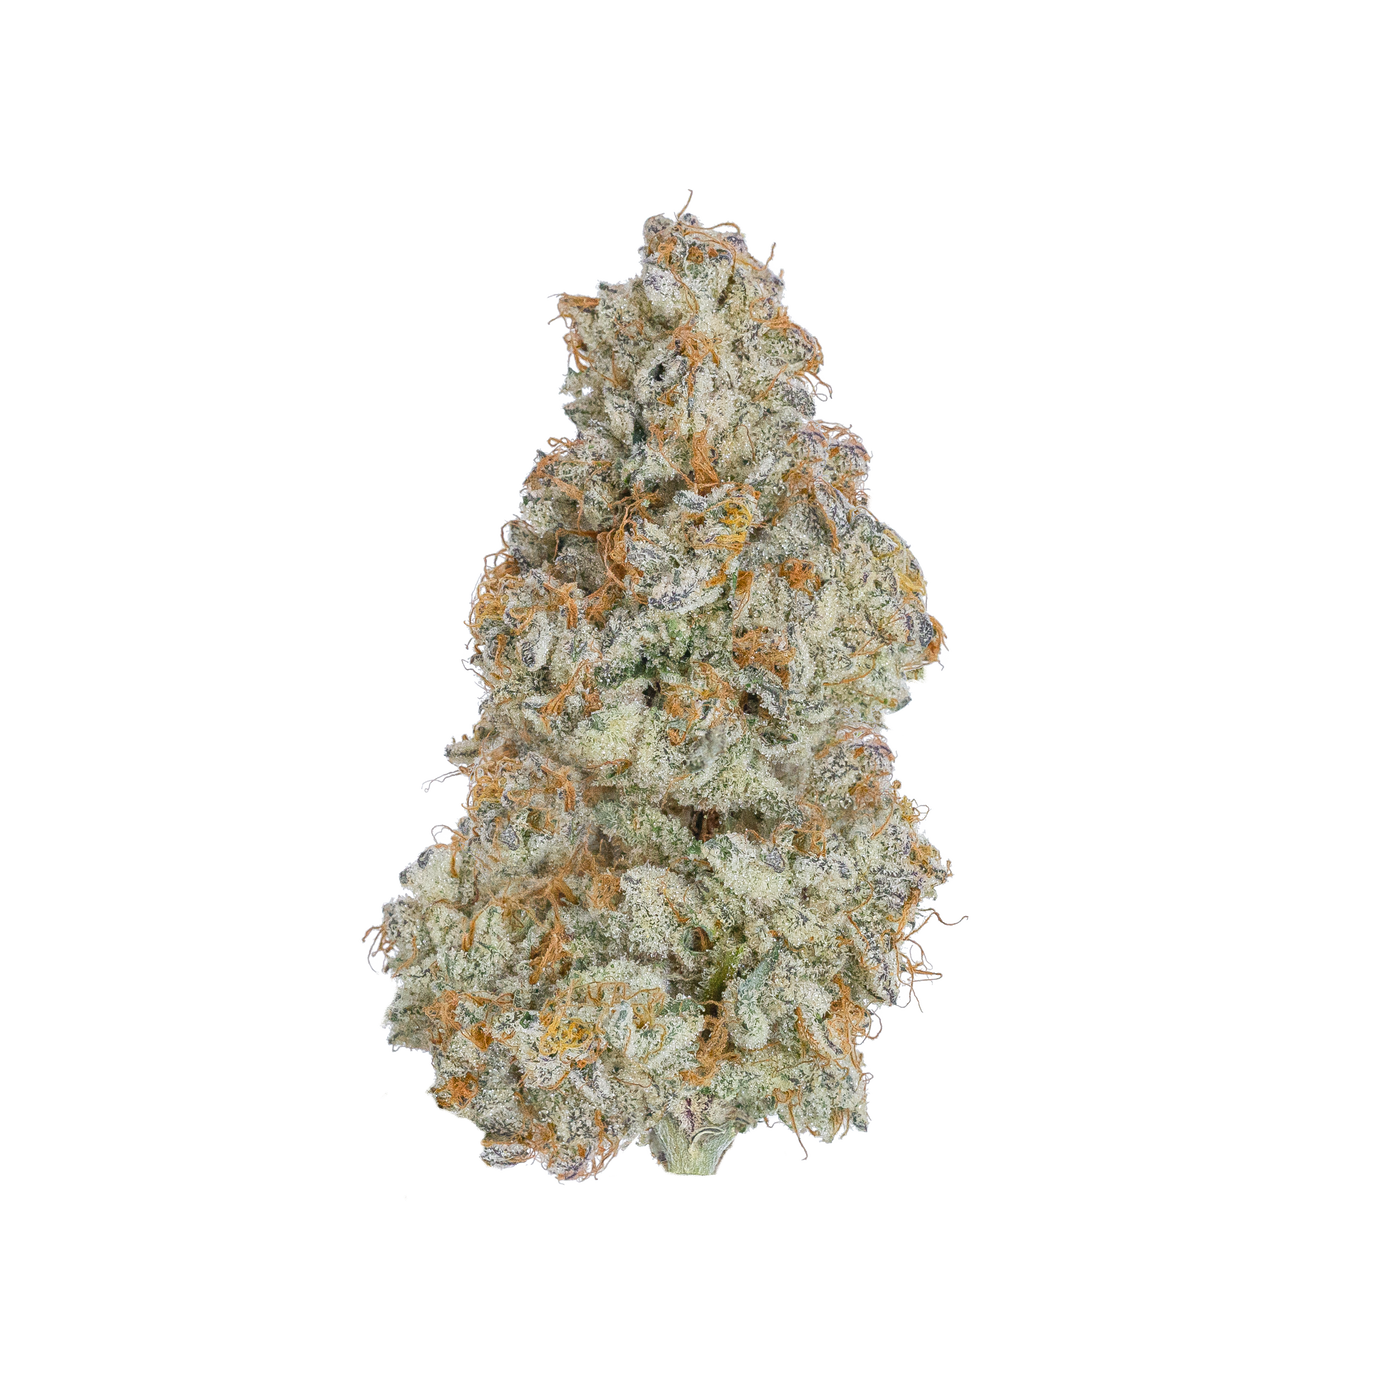 A frosty white and green nug of cannabis flower from the Cereal Milk strain sits against a black background.